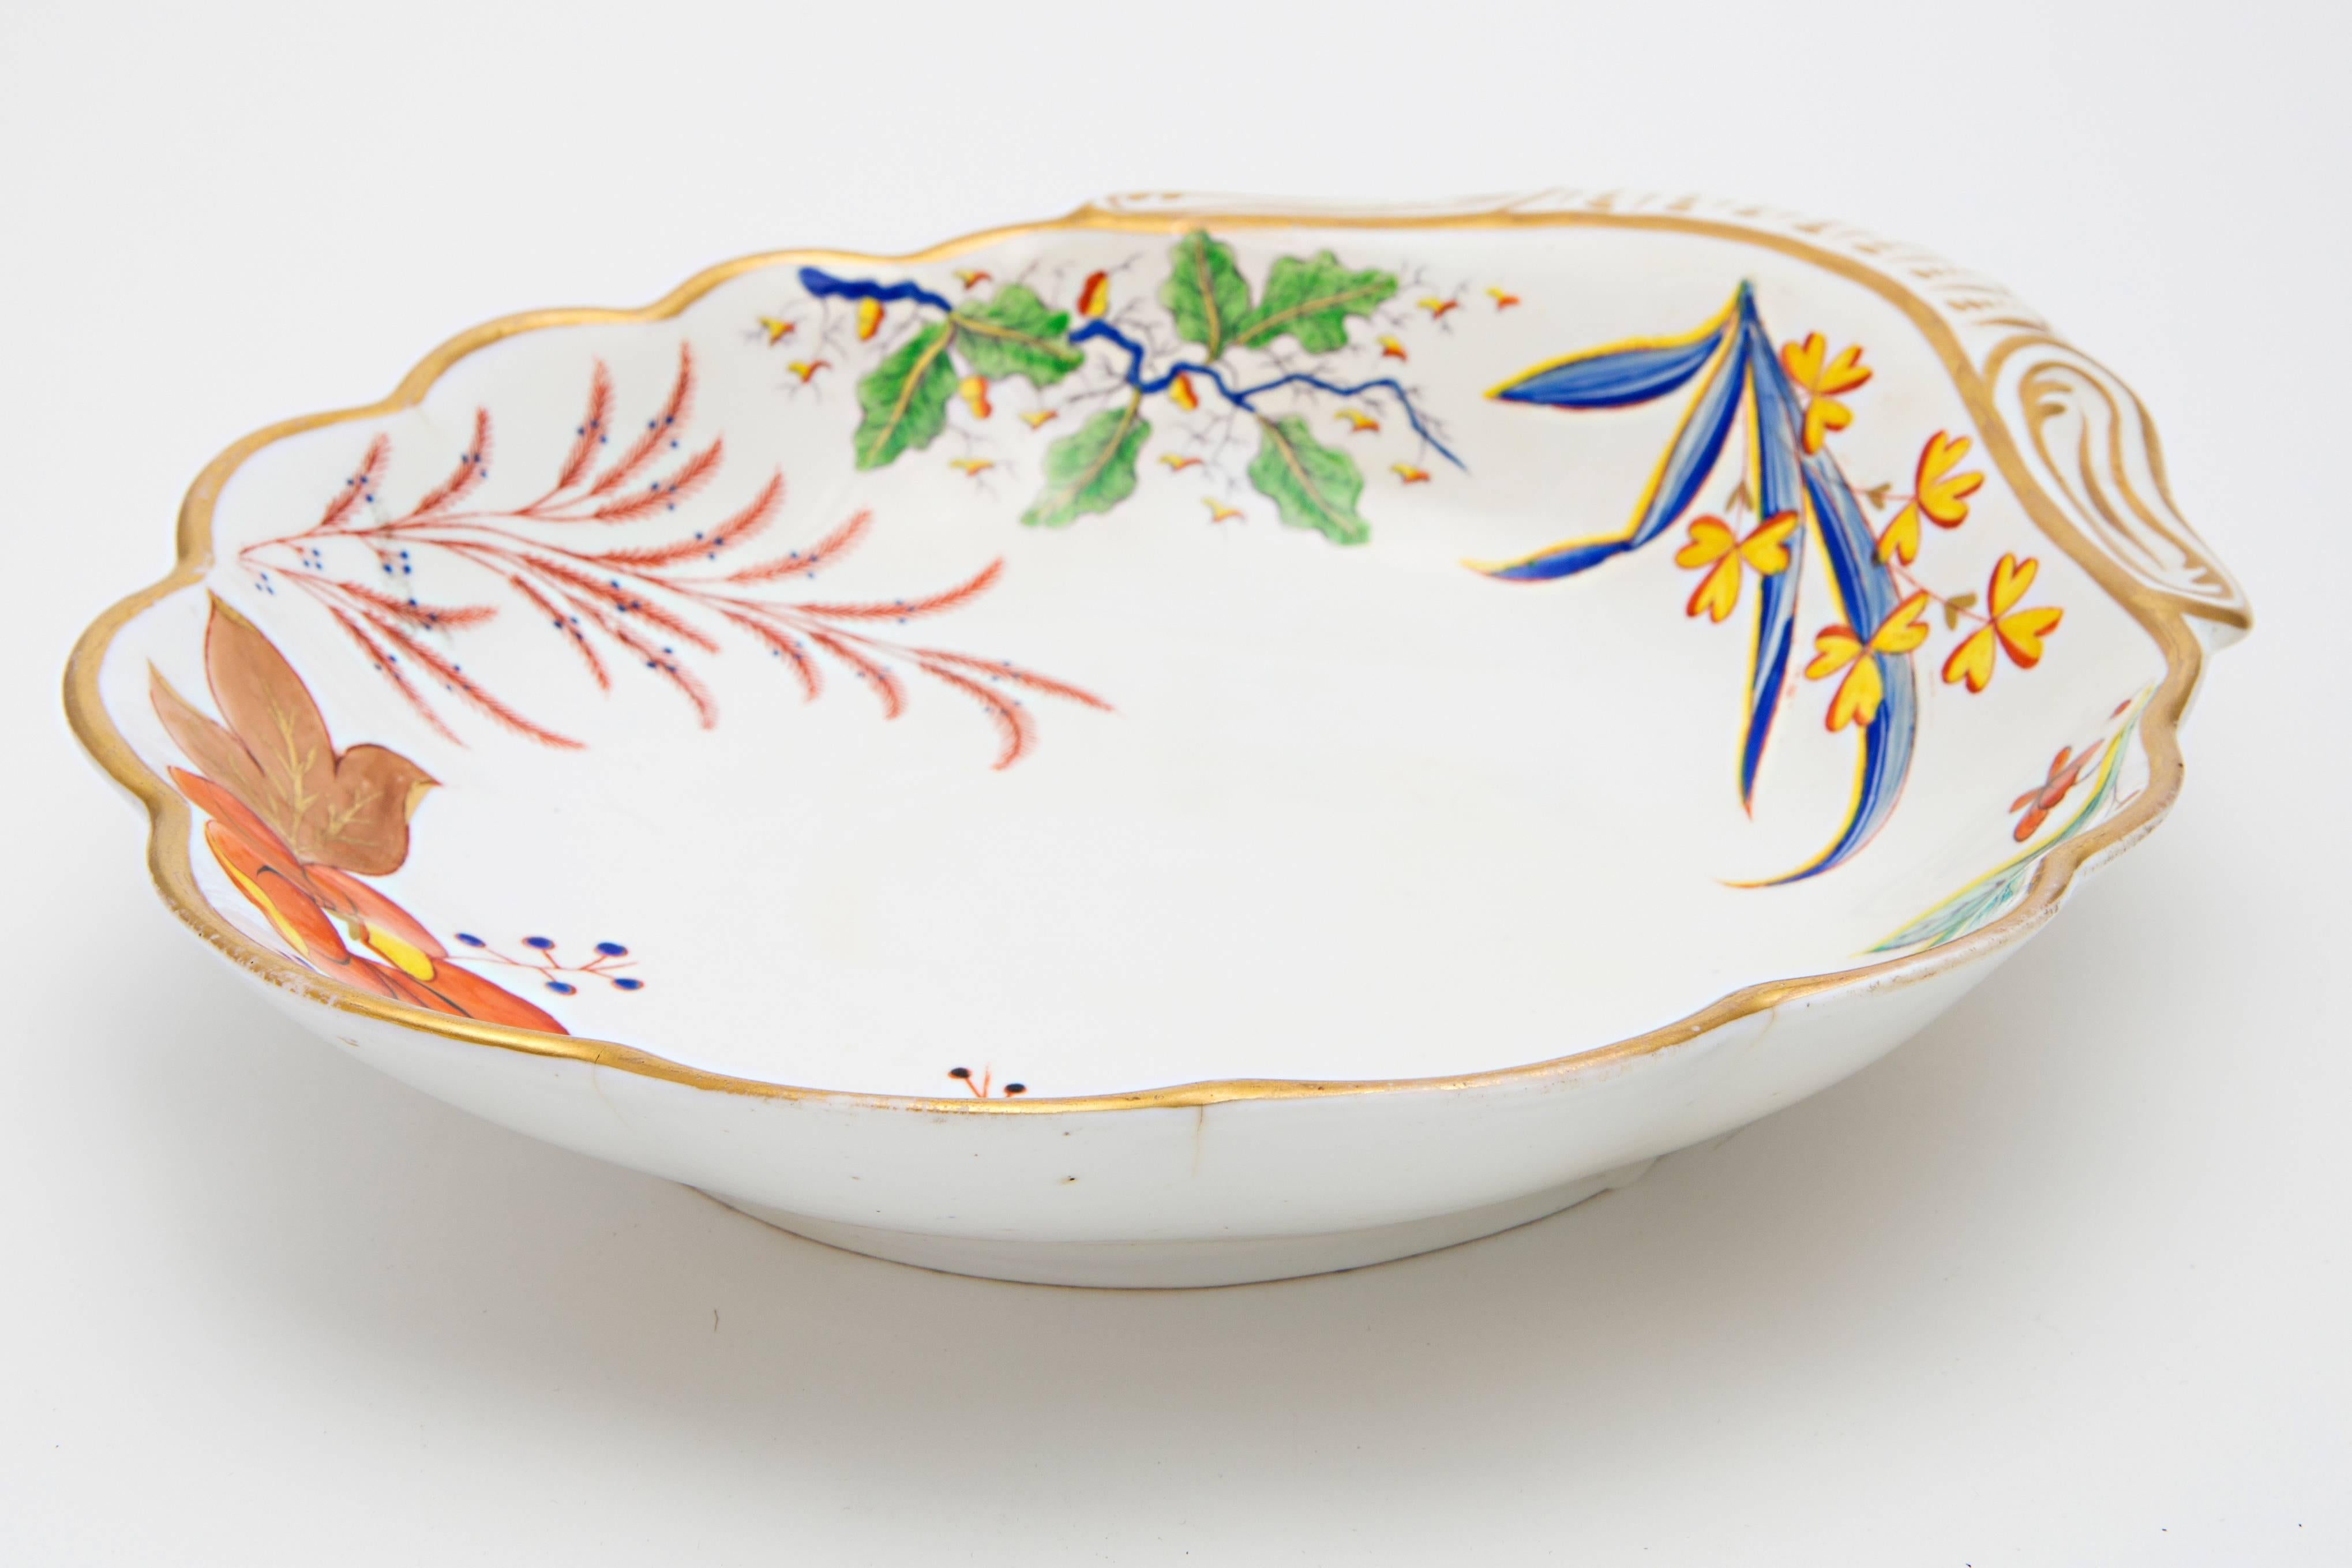 19th Century Porcelain Spode shell dish. The colors are in shades of orange, green, blue and gold.  